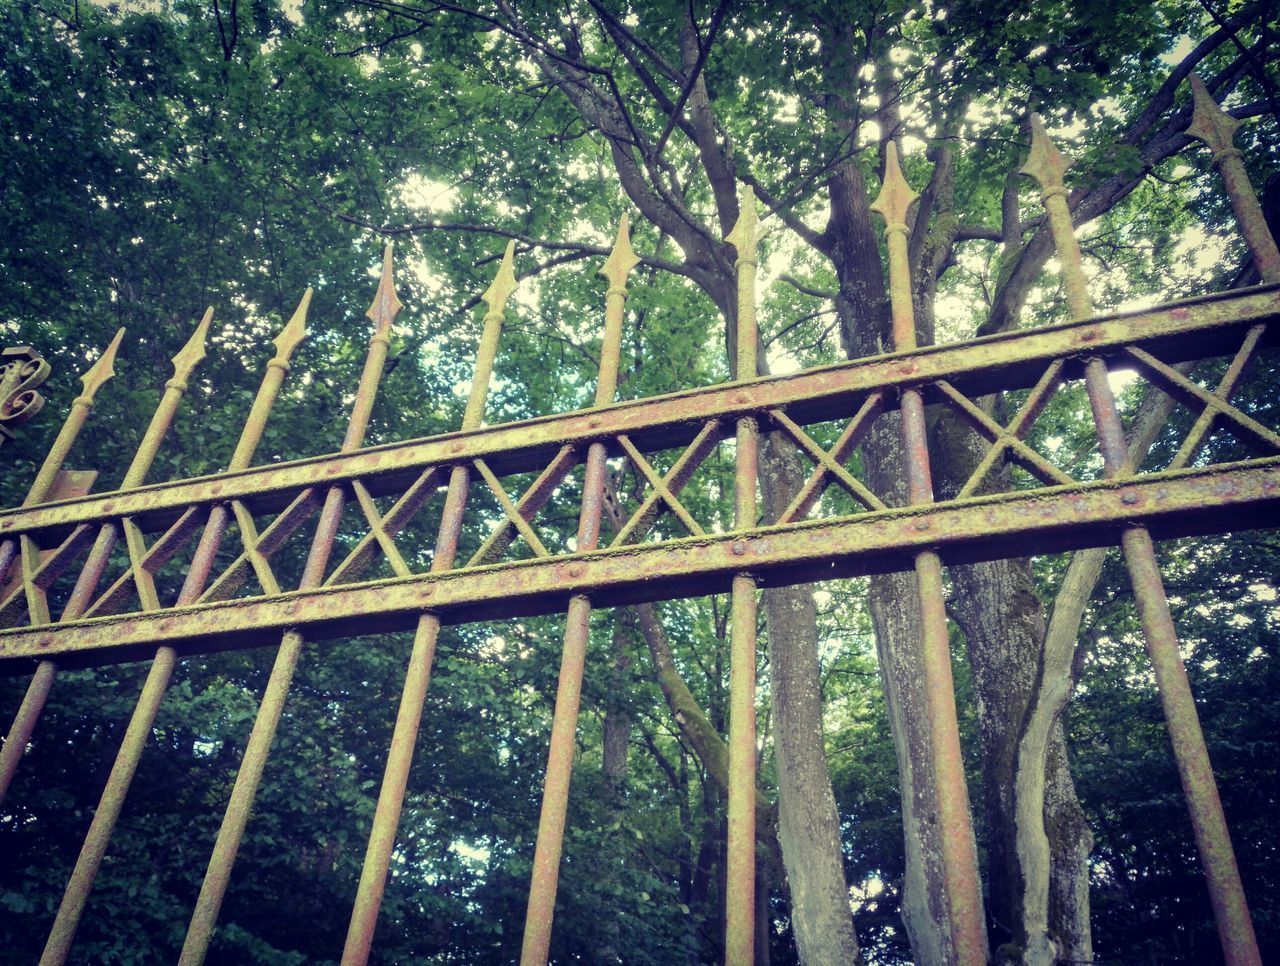 LOW ANGLE VIEW OF BRIDGE IN FOREST